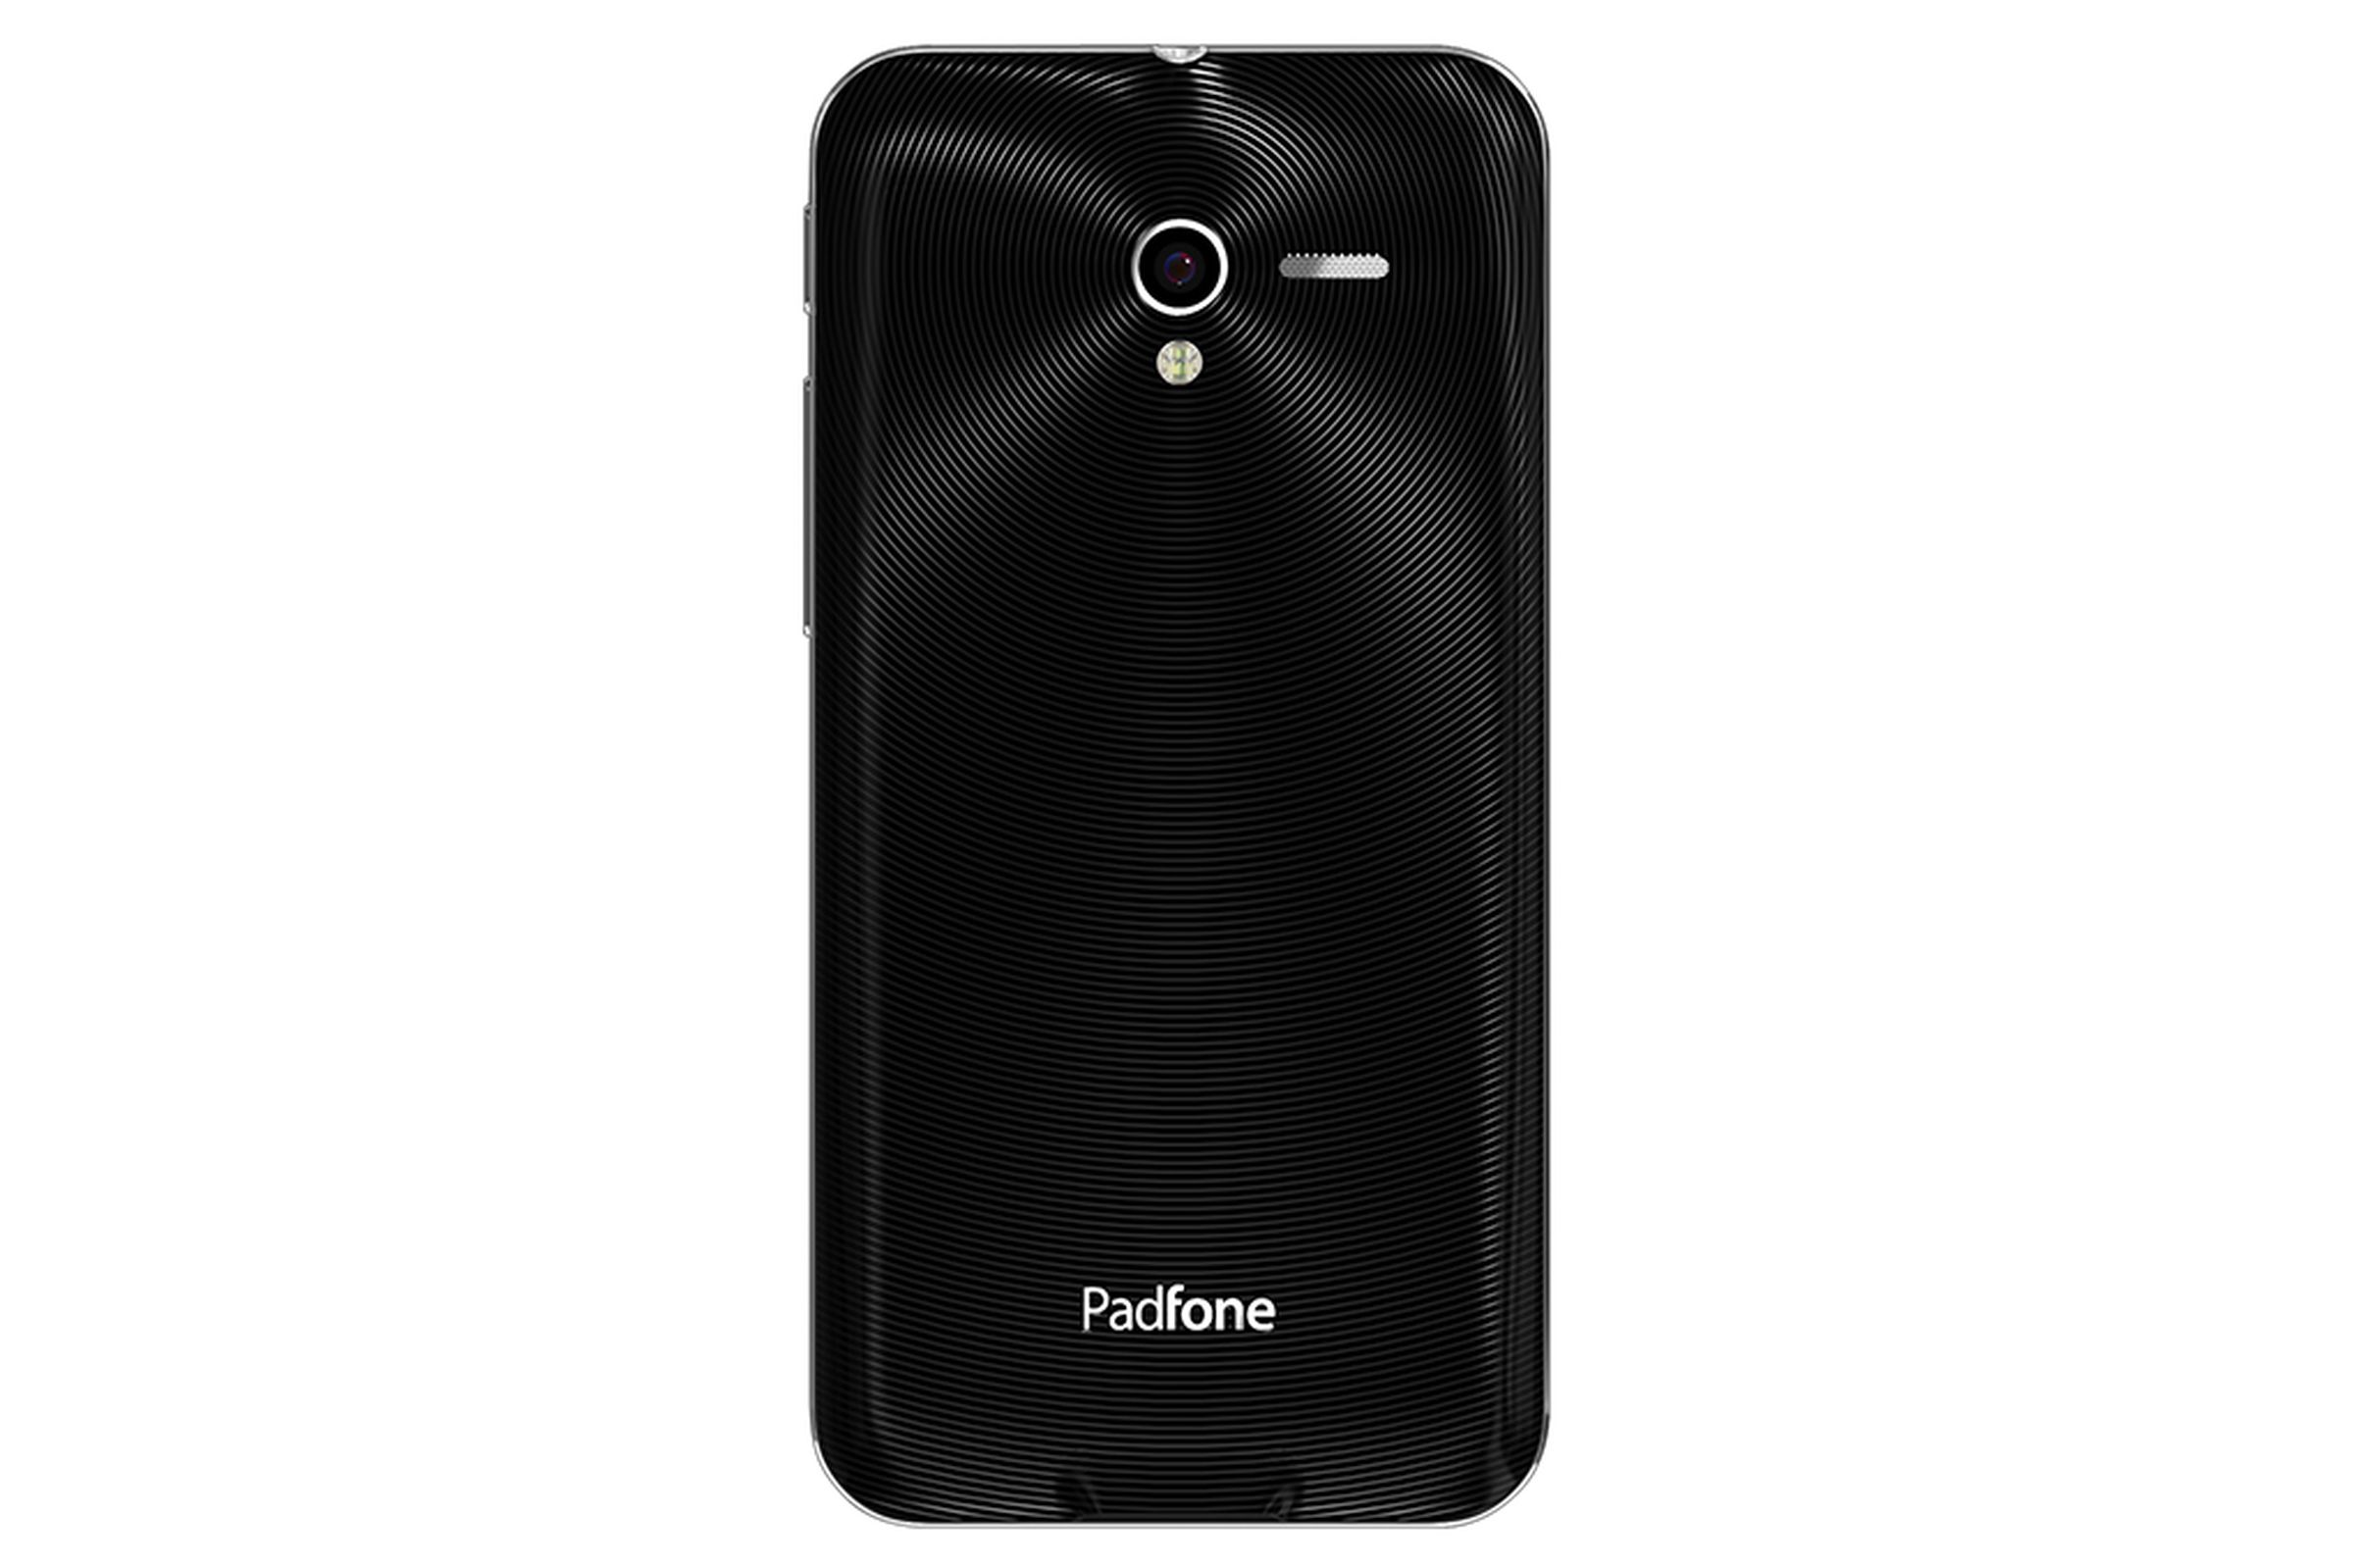 Asus Padfone 2 images